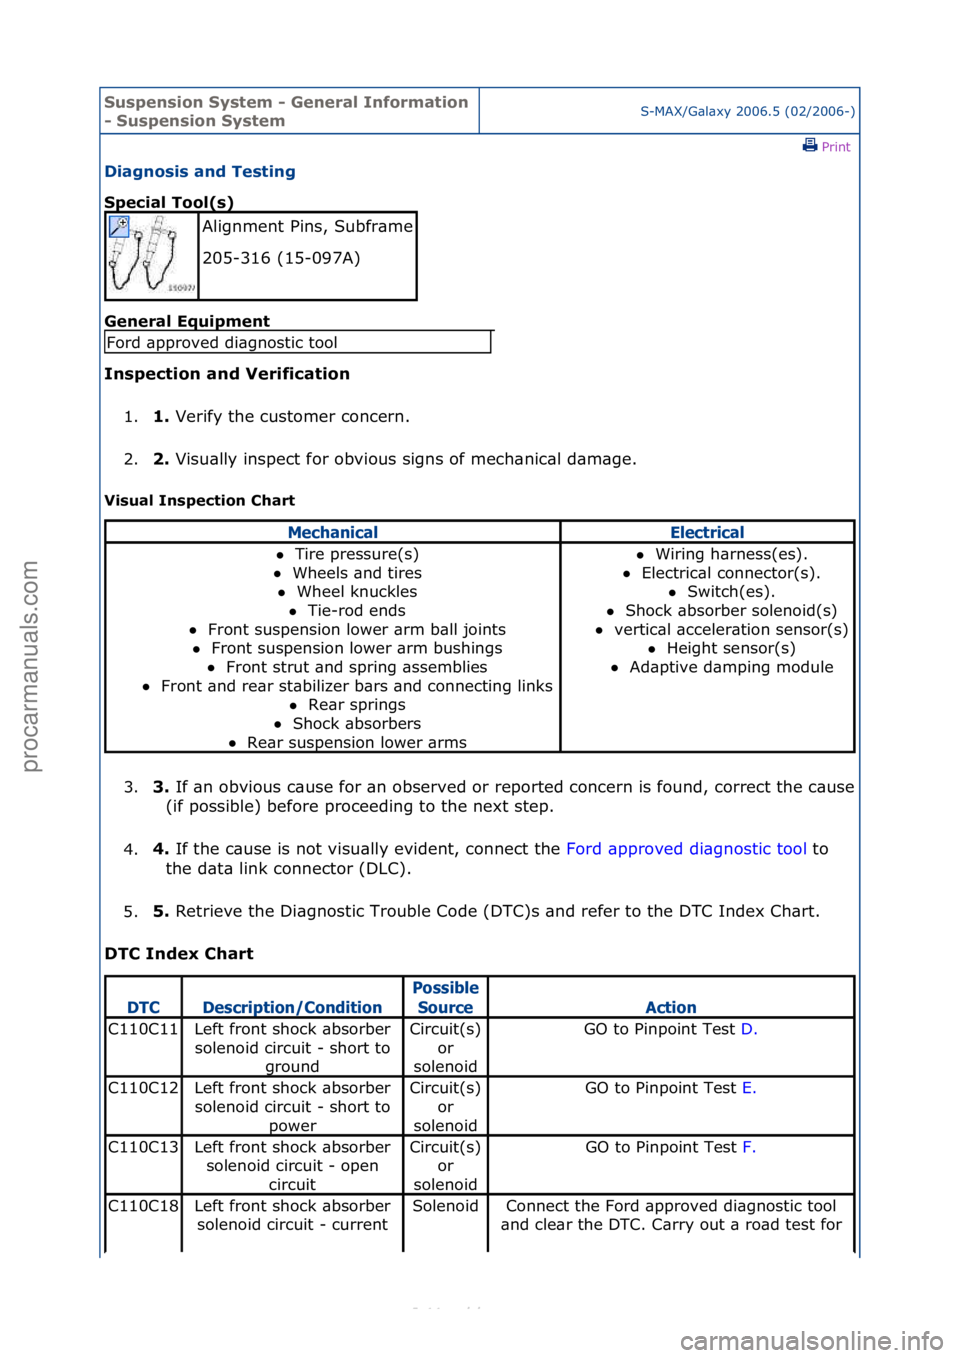 FORD S-MAX 2006  Service Repair Manual Suspensi\bn Syste\f - General Inf\br\fati\bn 
- Suspensi\bn Syste\fS-MAX/G\bl\bxy\f2006.5\f(02/2006-)\fPrint \f
Diagn\bsis and Testing 
Special T\b\bl(s) 
Gen

eral Equip\fent 
Inspecti\bn and Verific